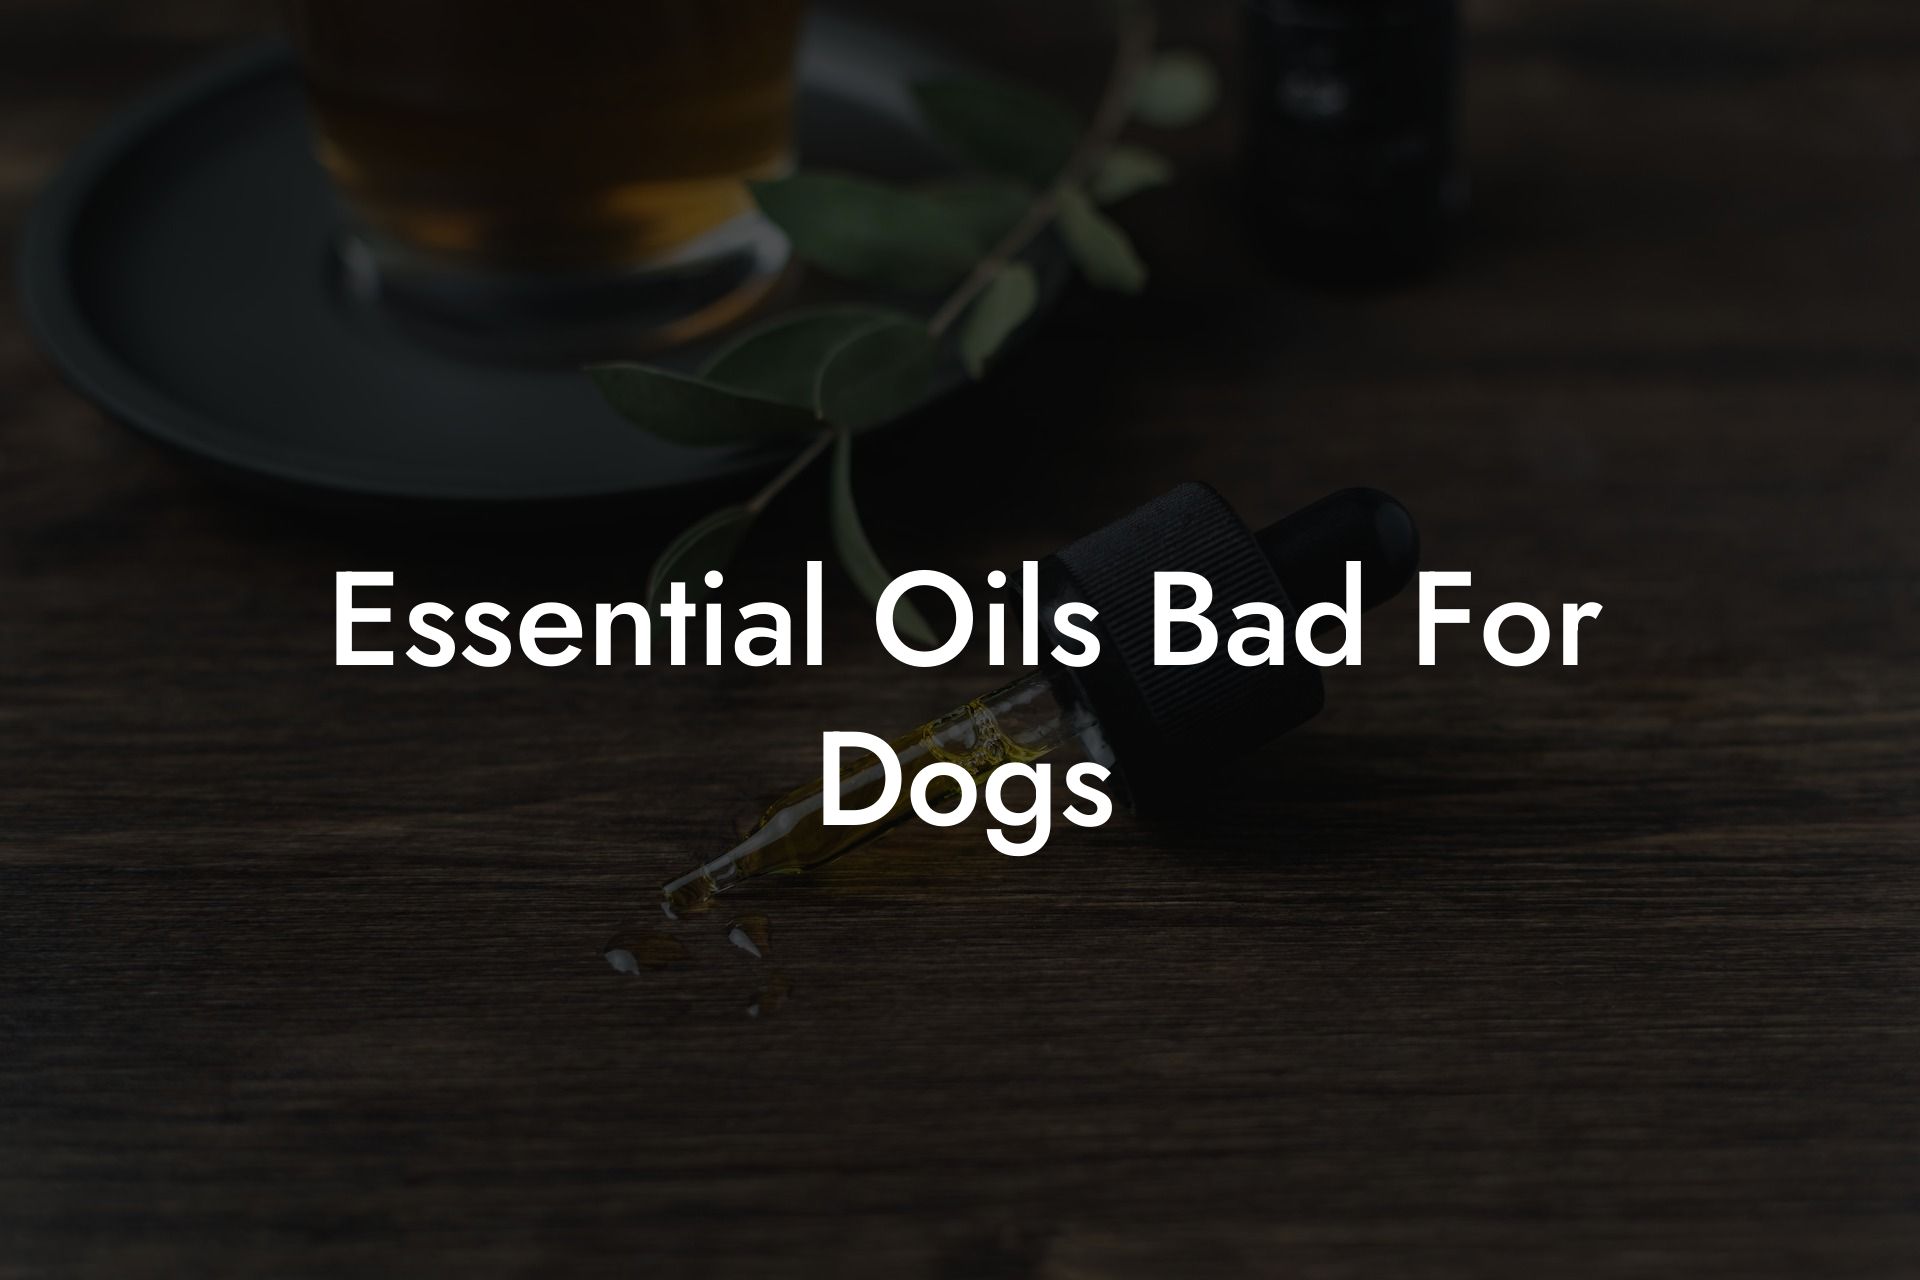 Essential Oils Bad For Dogs